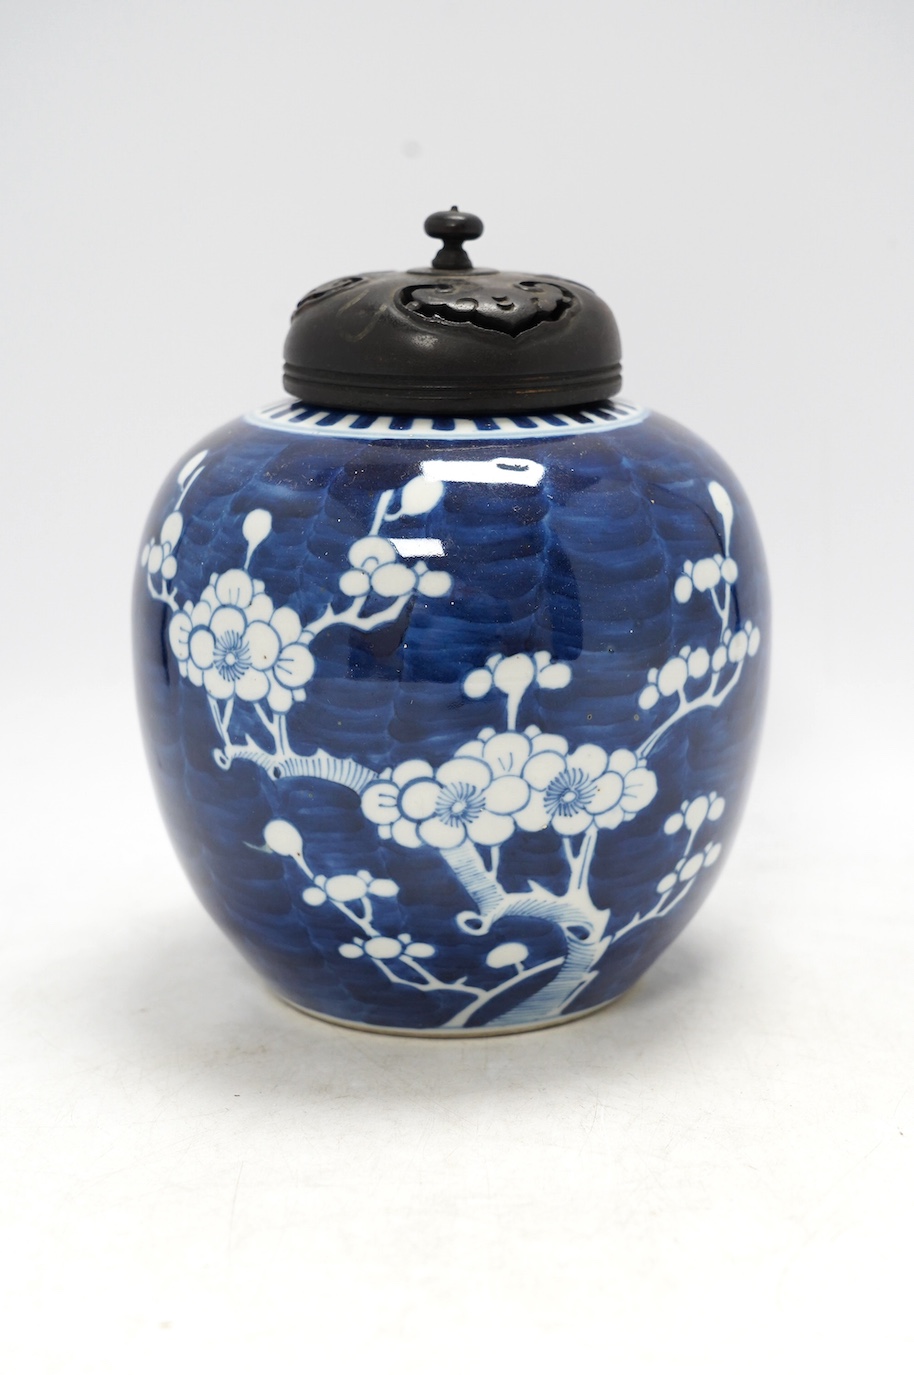 A Chinese blue and white prunus jar, with wood cover, early 20th century, 20.5cm high. Condition - good.